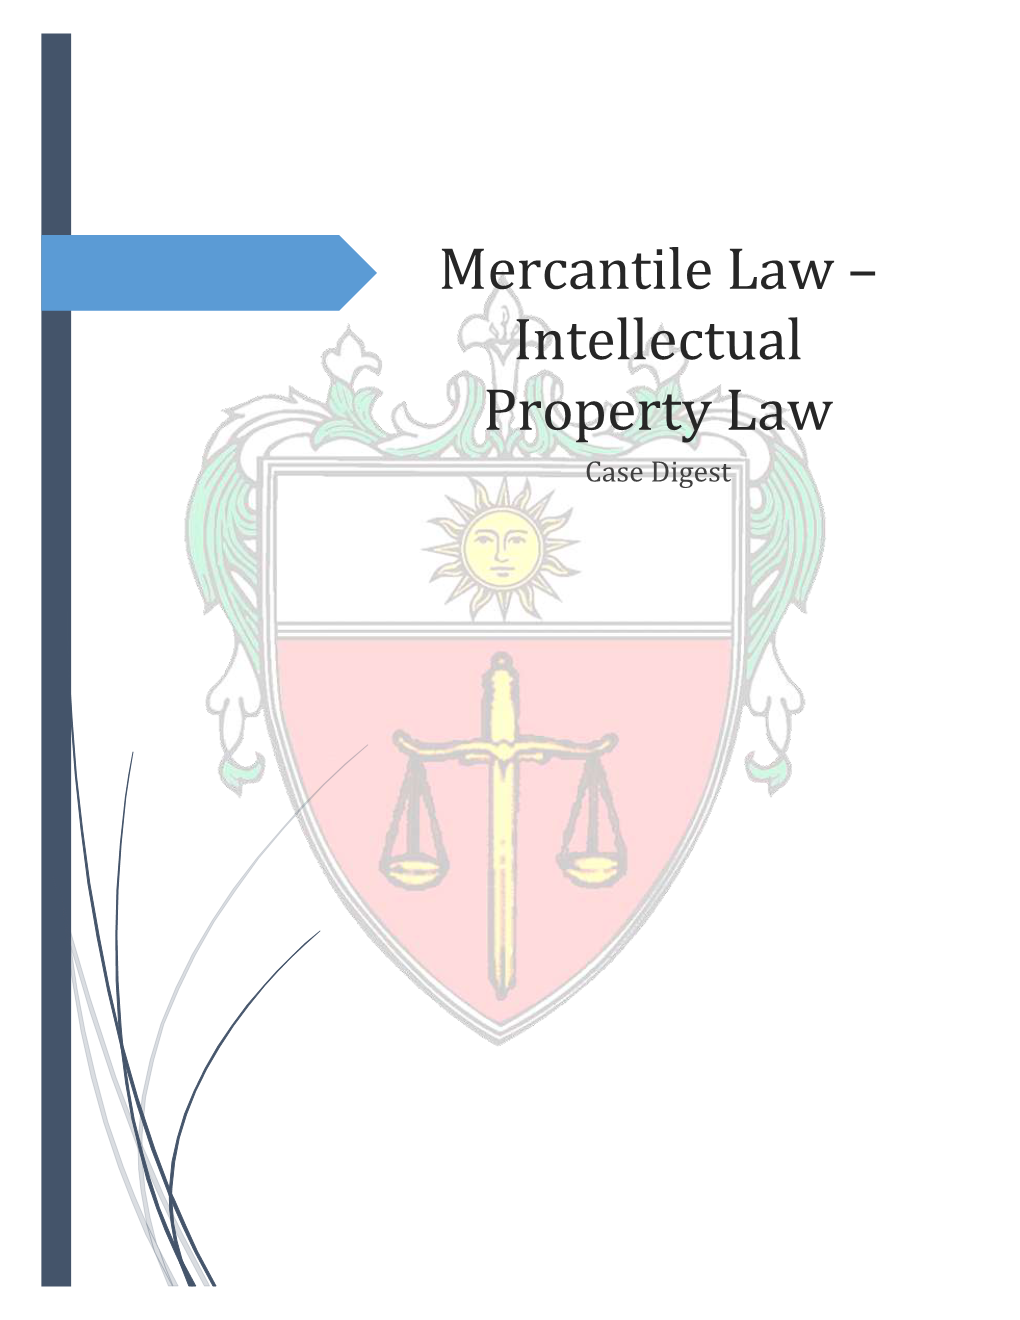 Mercantile Law – Intellectual Property Law Case Digest